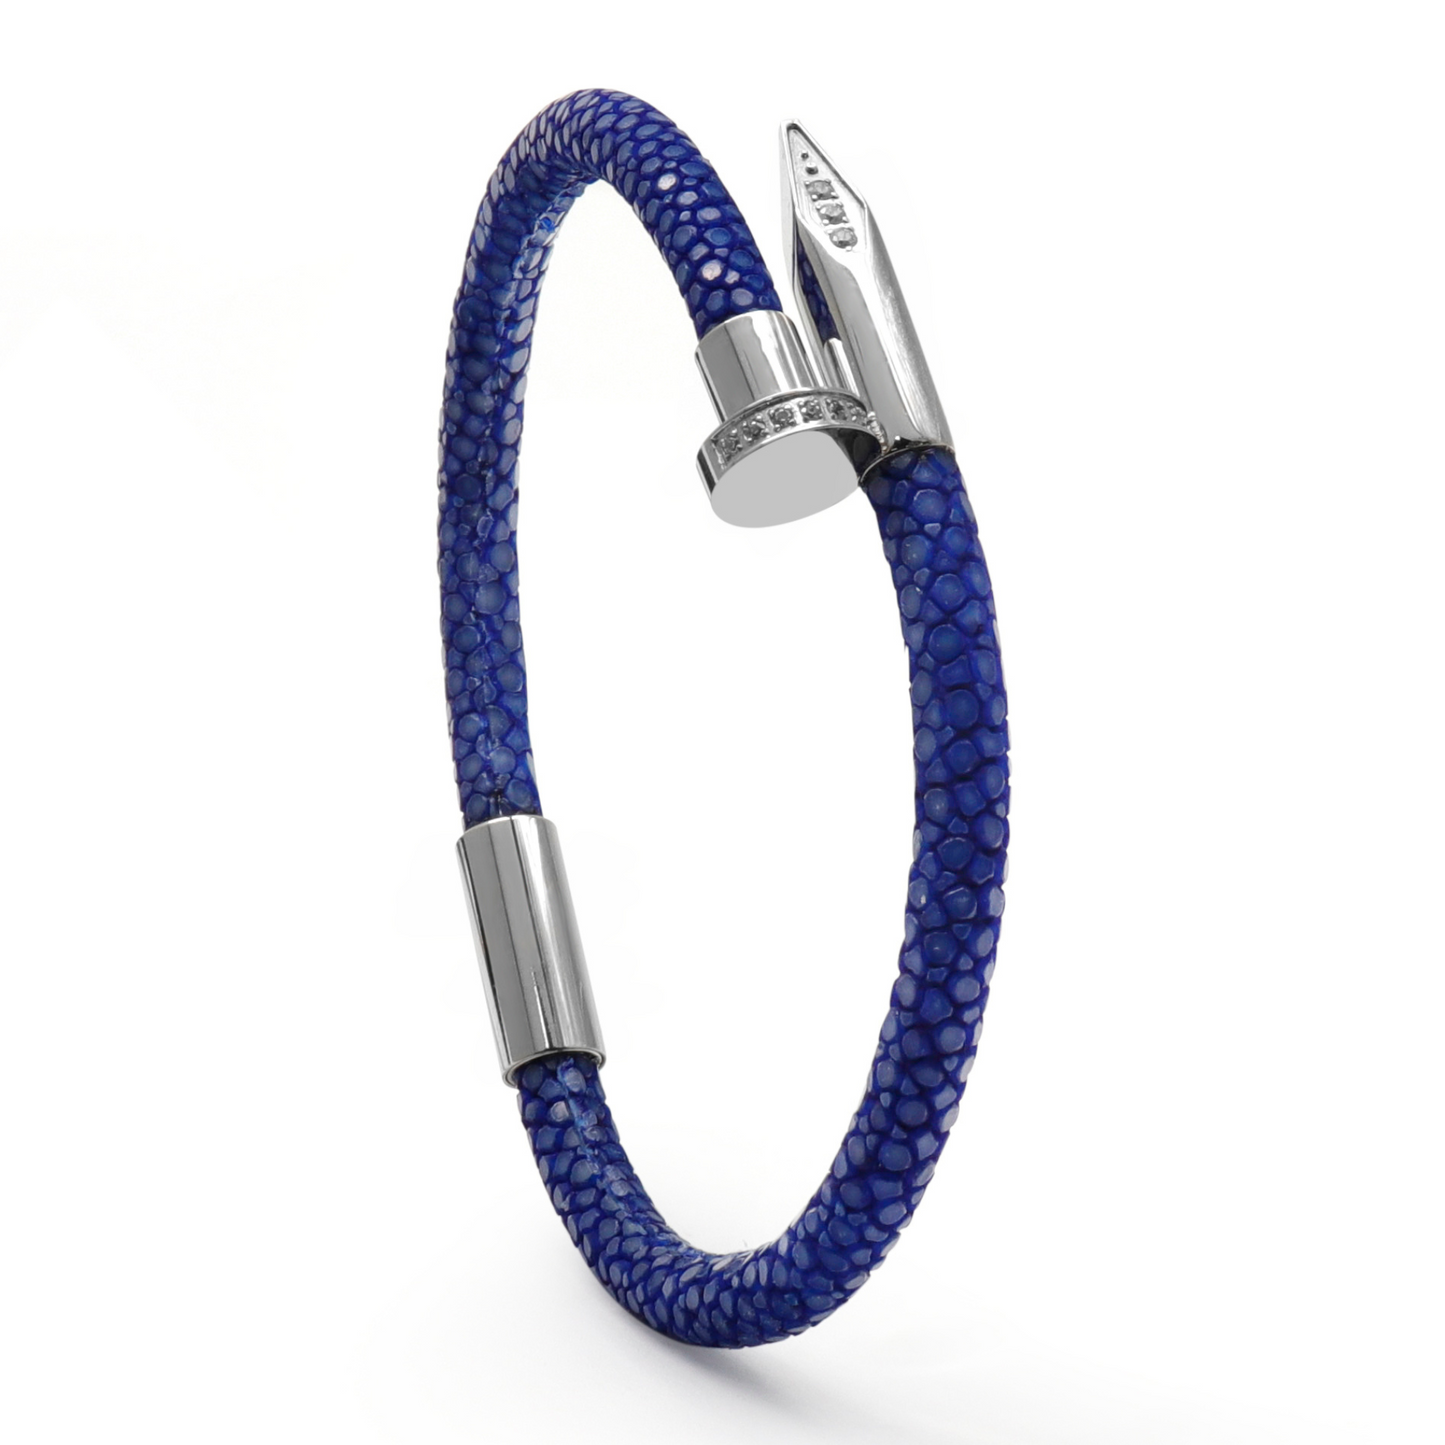 Bracelet - Blue Leather with Silver Nail and Zircon Diamond